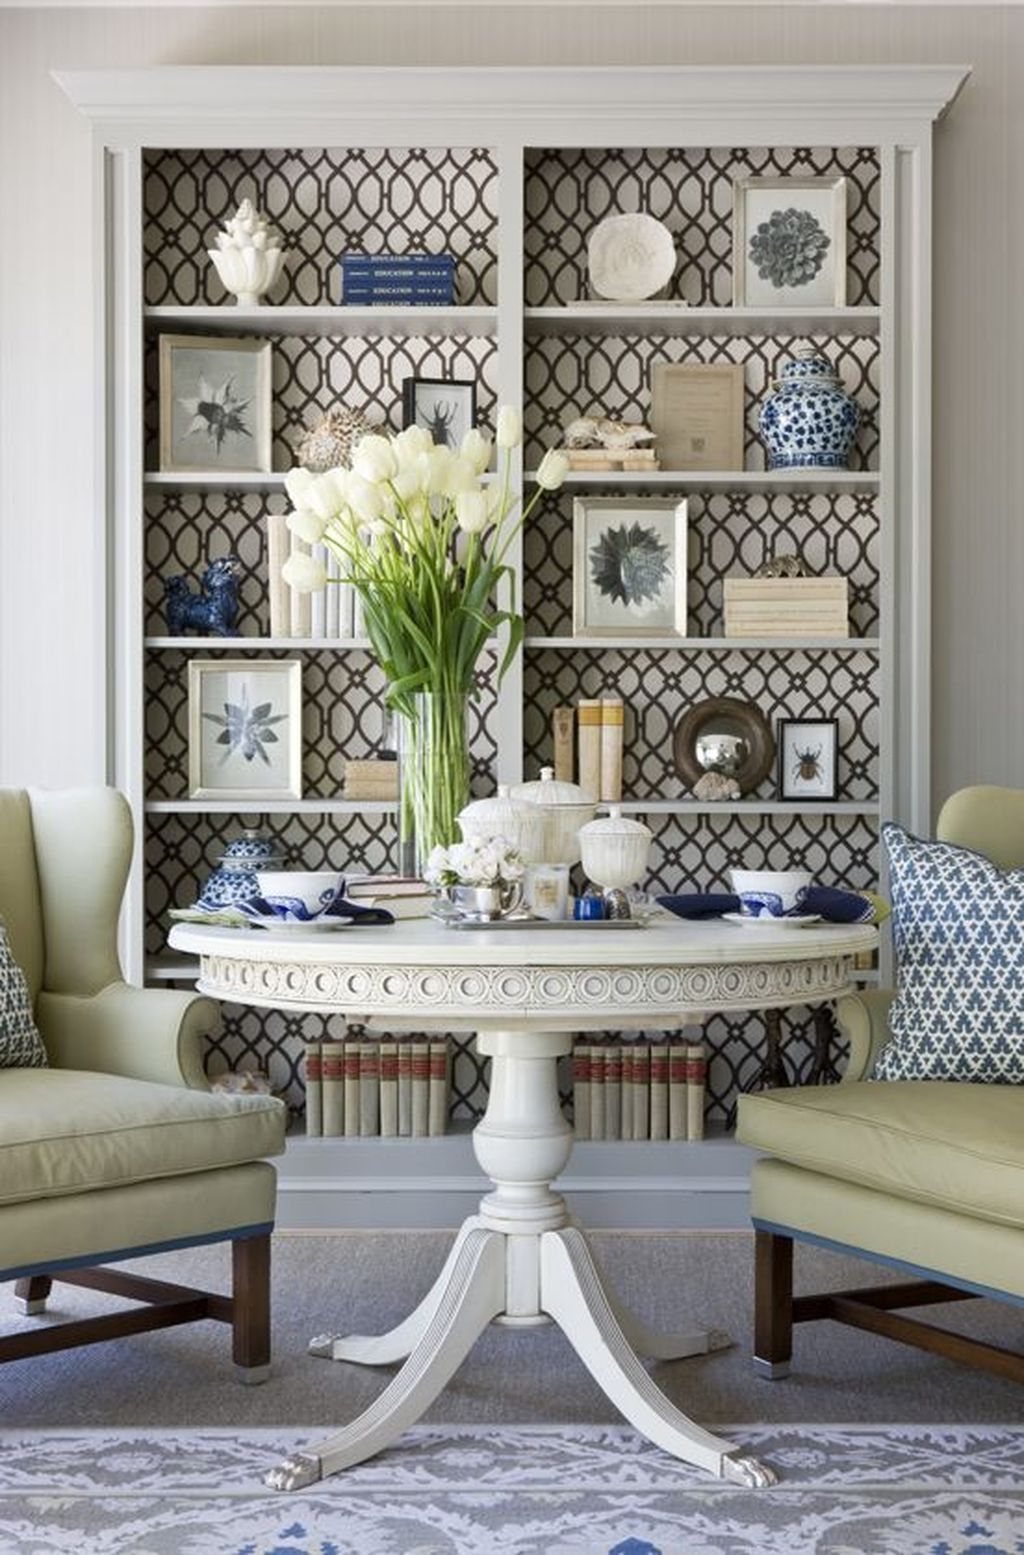 Fabulous Bookcase Decorating Ideas To Perfect Your Interior Design 01